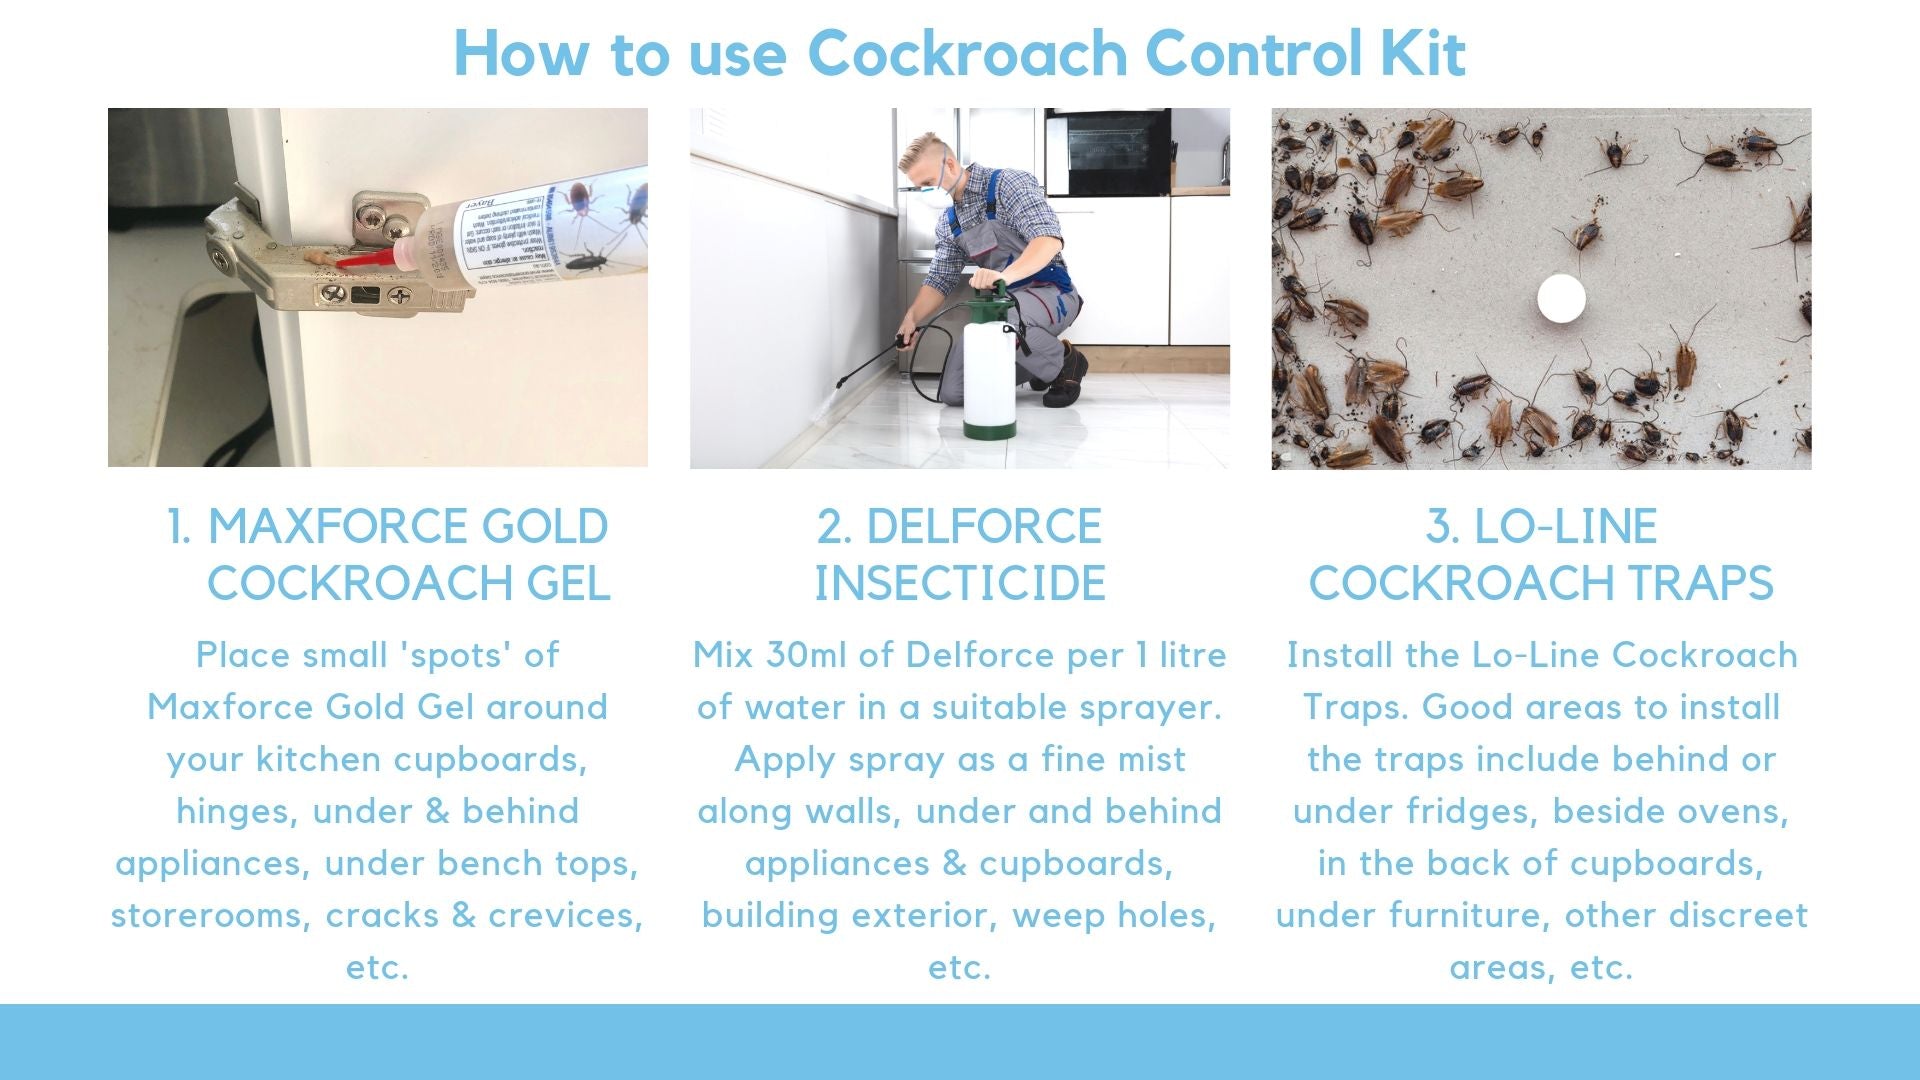 Cockroach Control Kit Instructions